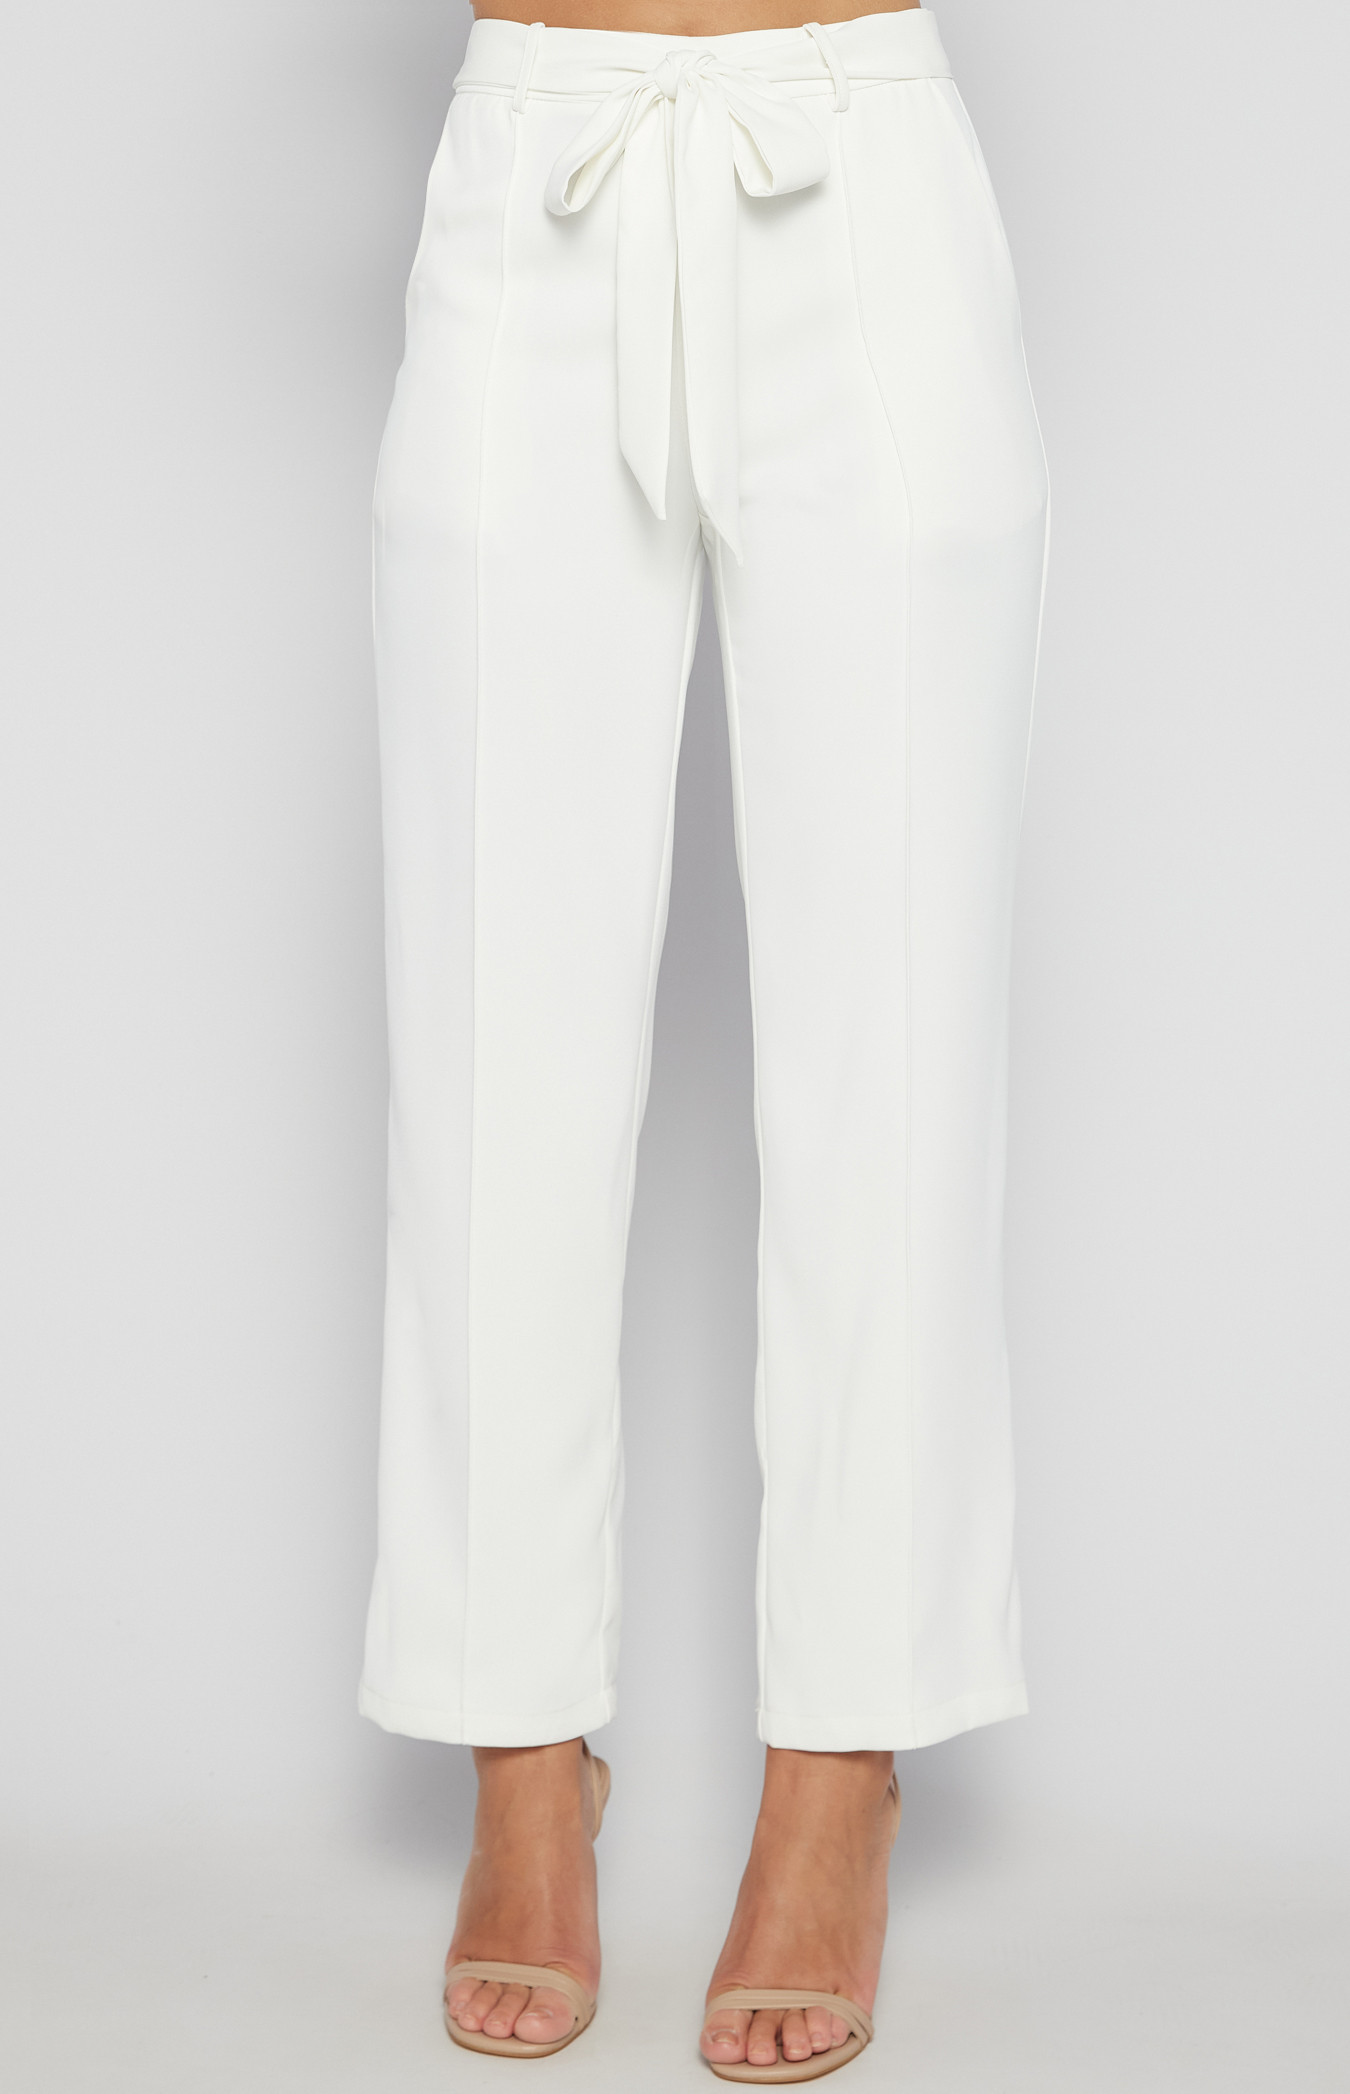 High Waisted Pants with Front Seam Detail and Belt (SPA467A)